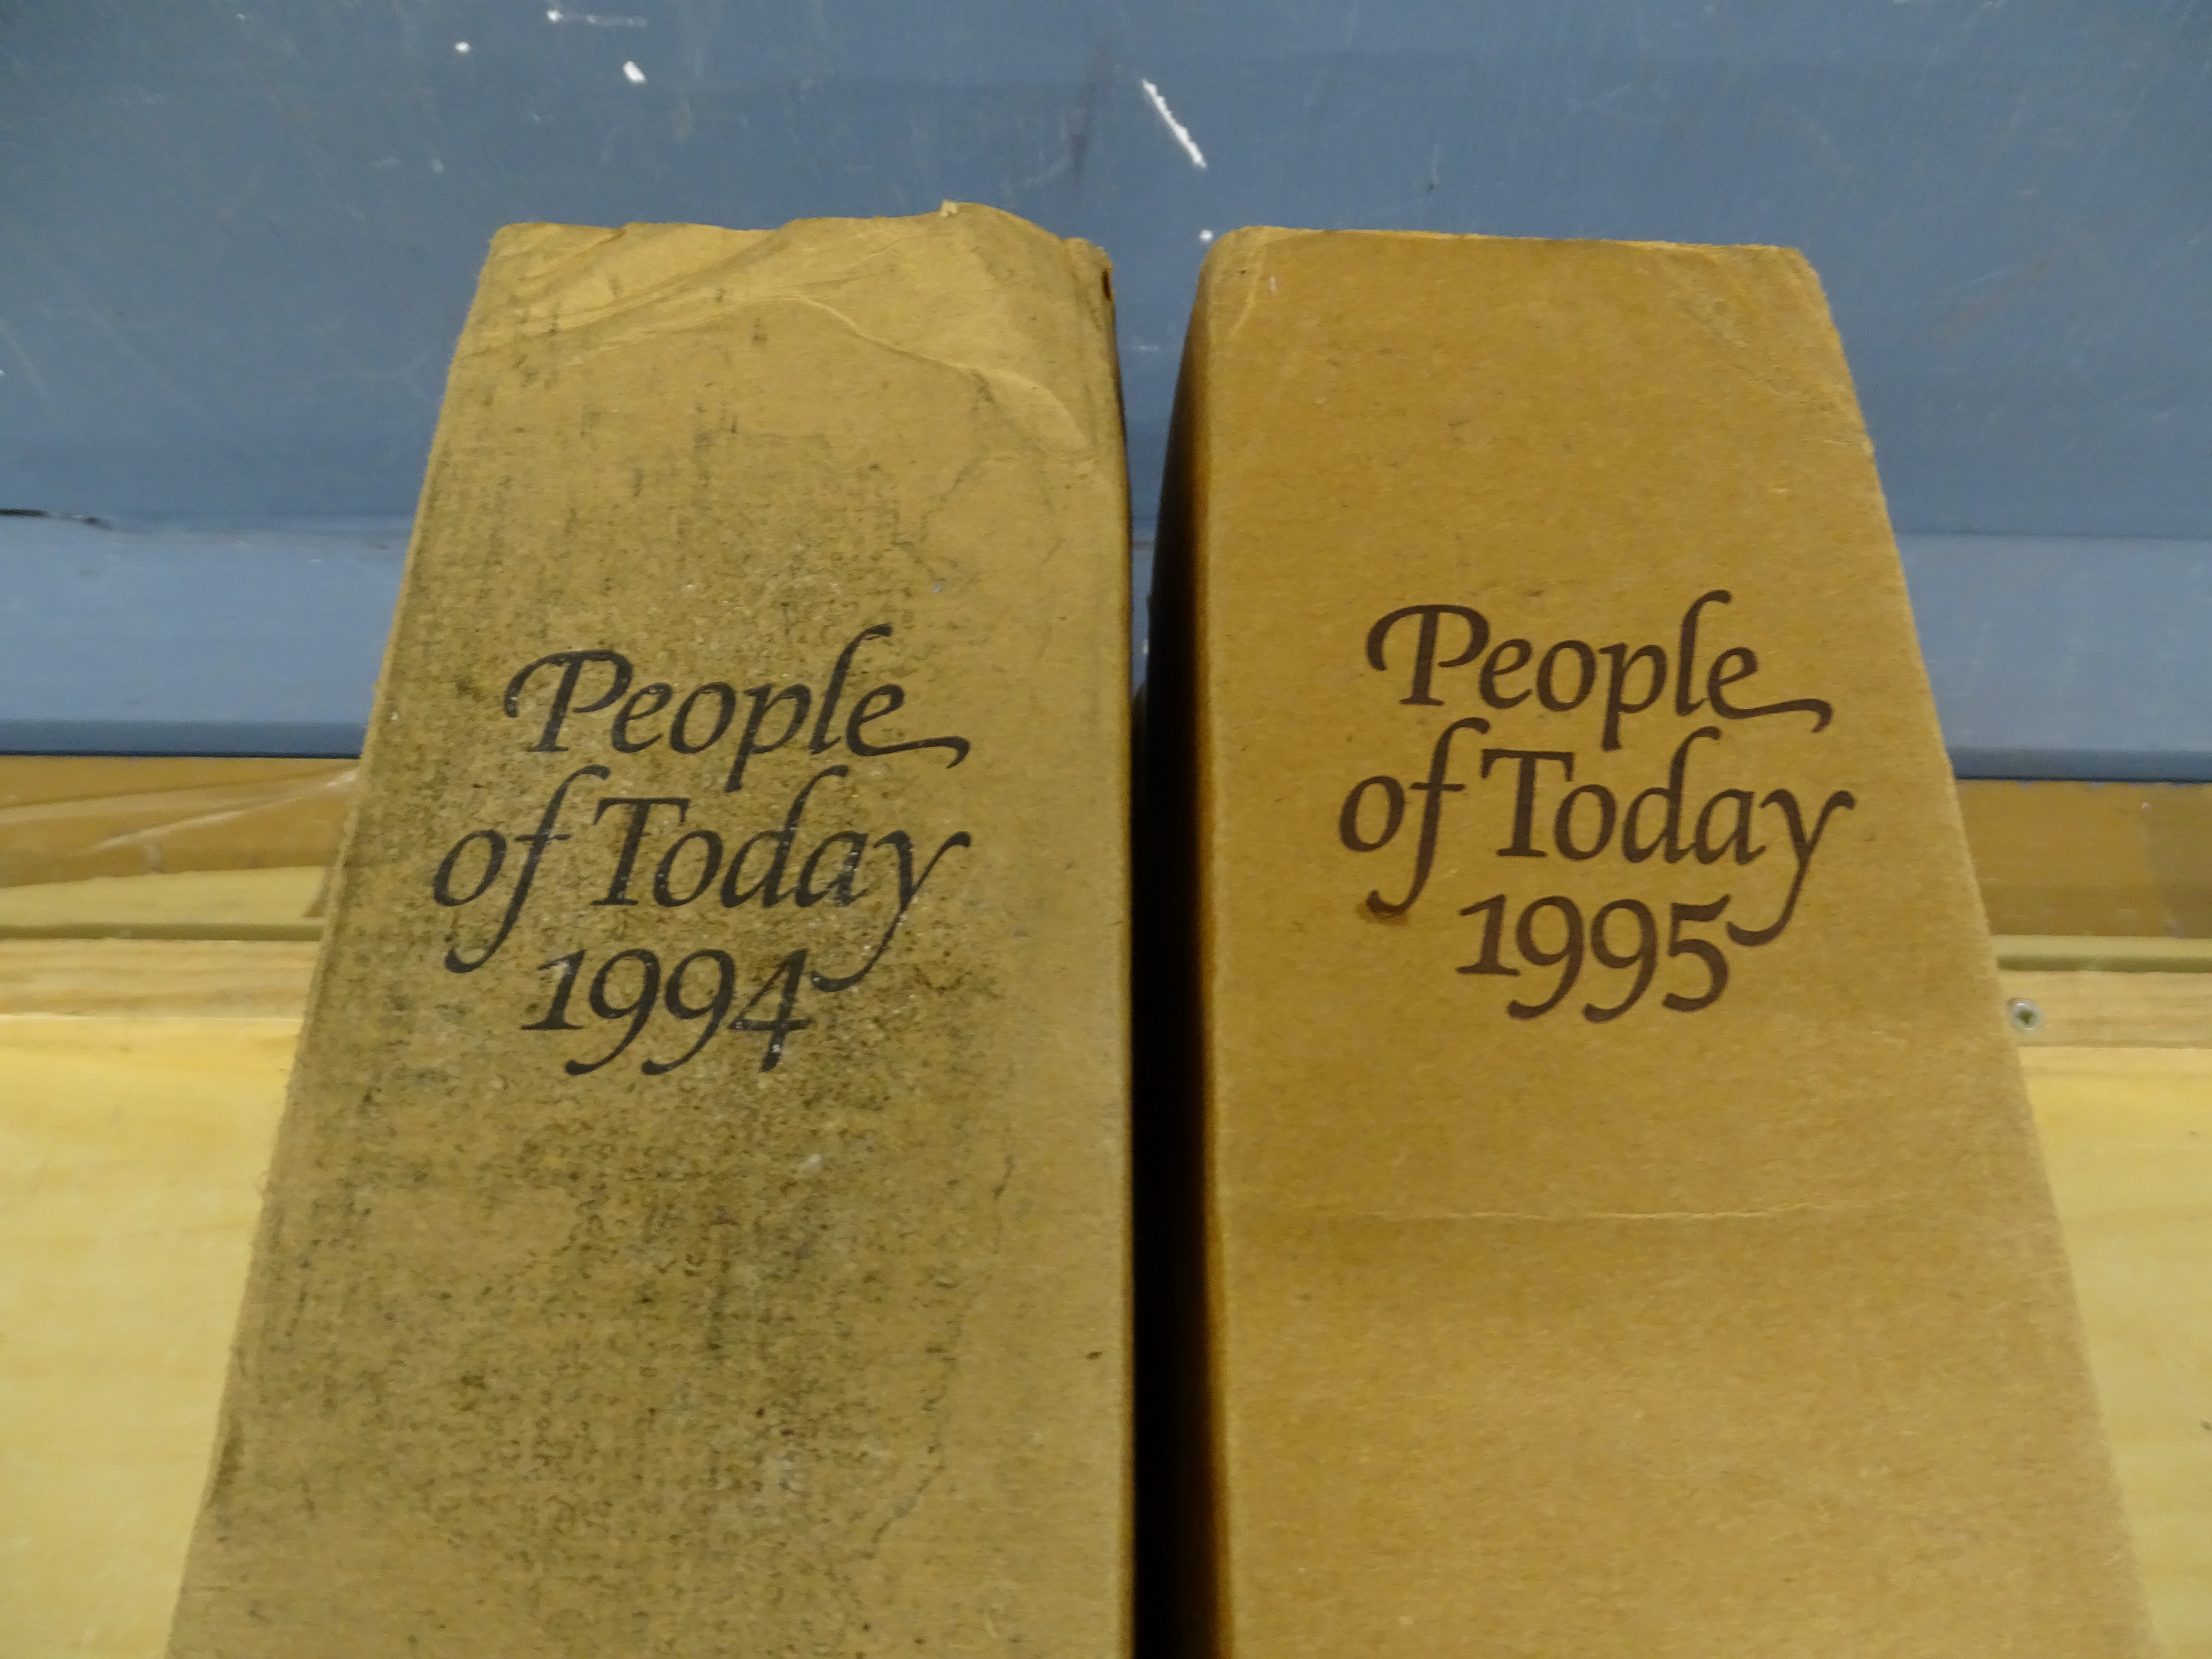 Debretts 'People of Today' 1994 and 1995 hardback books - Image 3 of 4